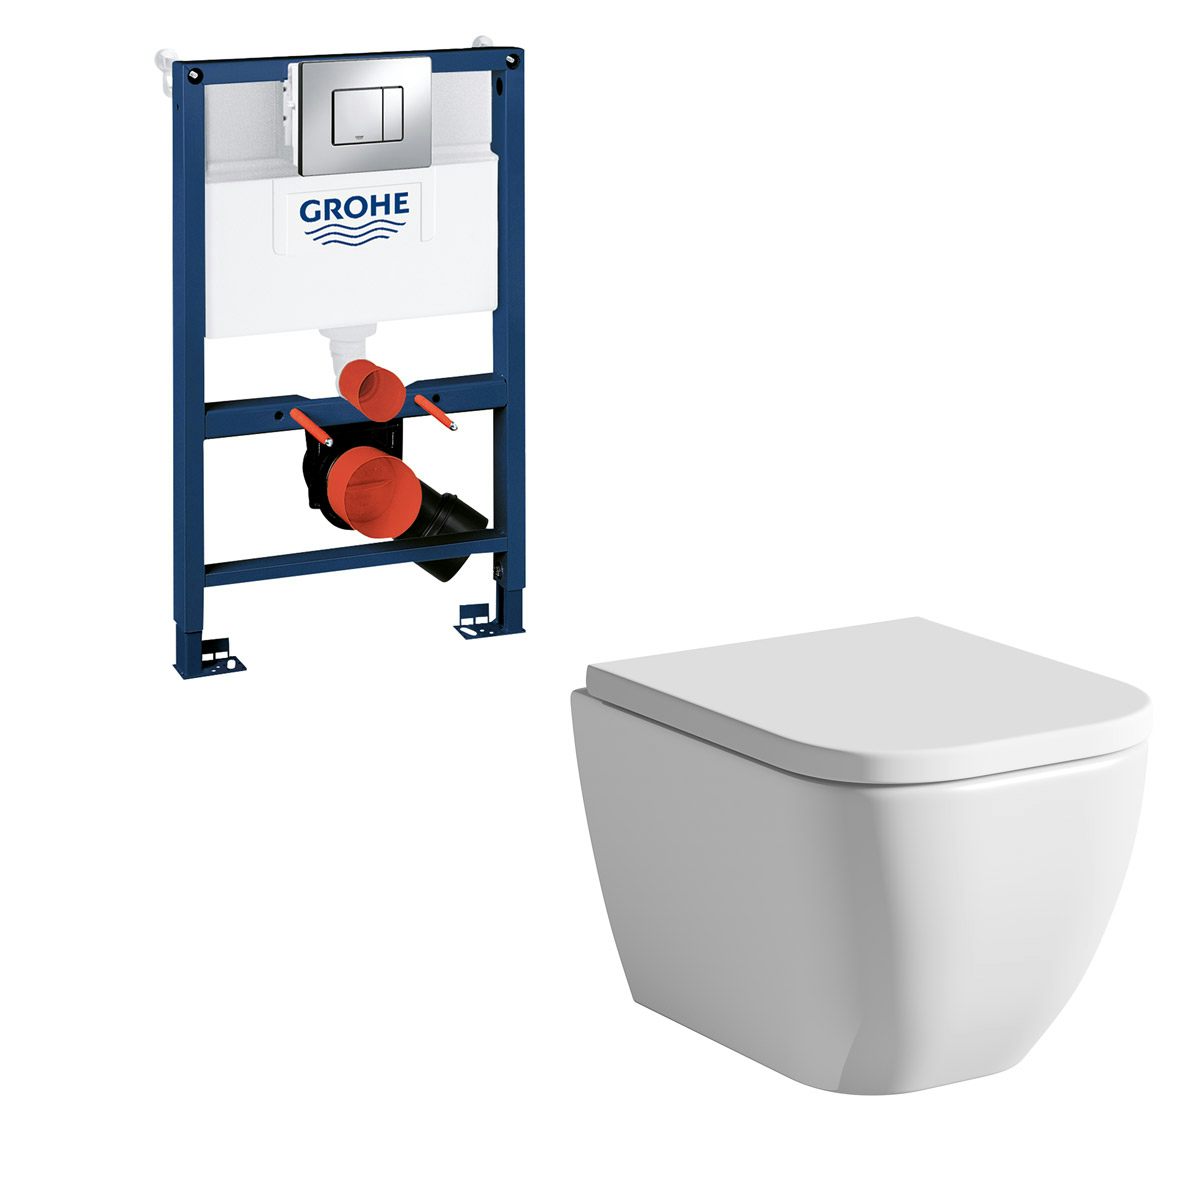 Mode Ellis short projection wall hung toilet, Grohe frame and Skate Cosmopolitan push plate 0.82m